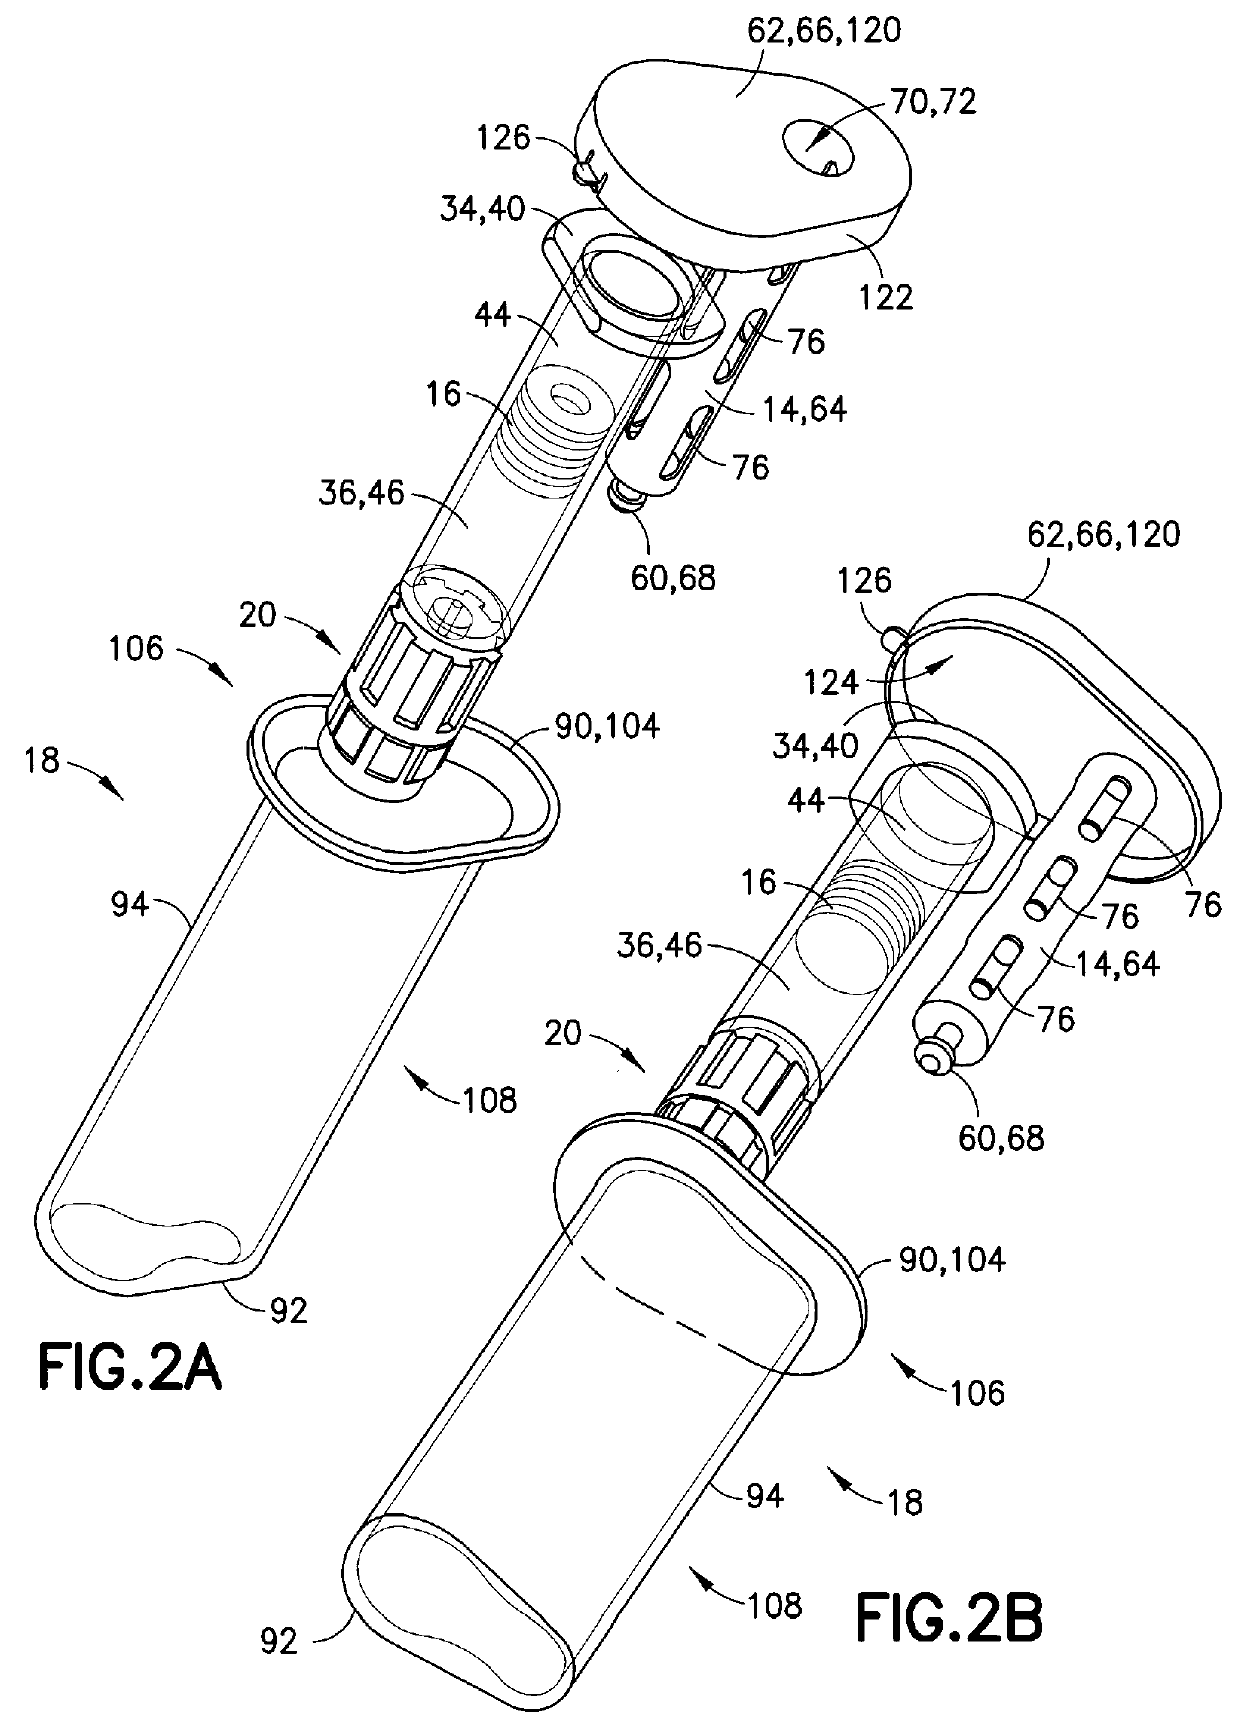 Attachable Plunger Rod and Associated Packaging